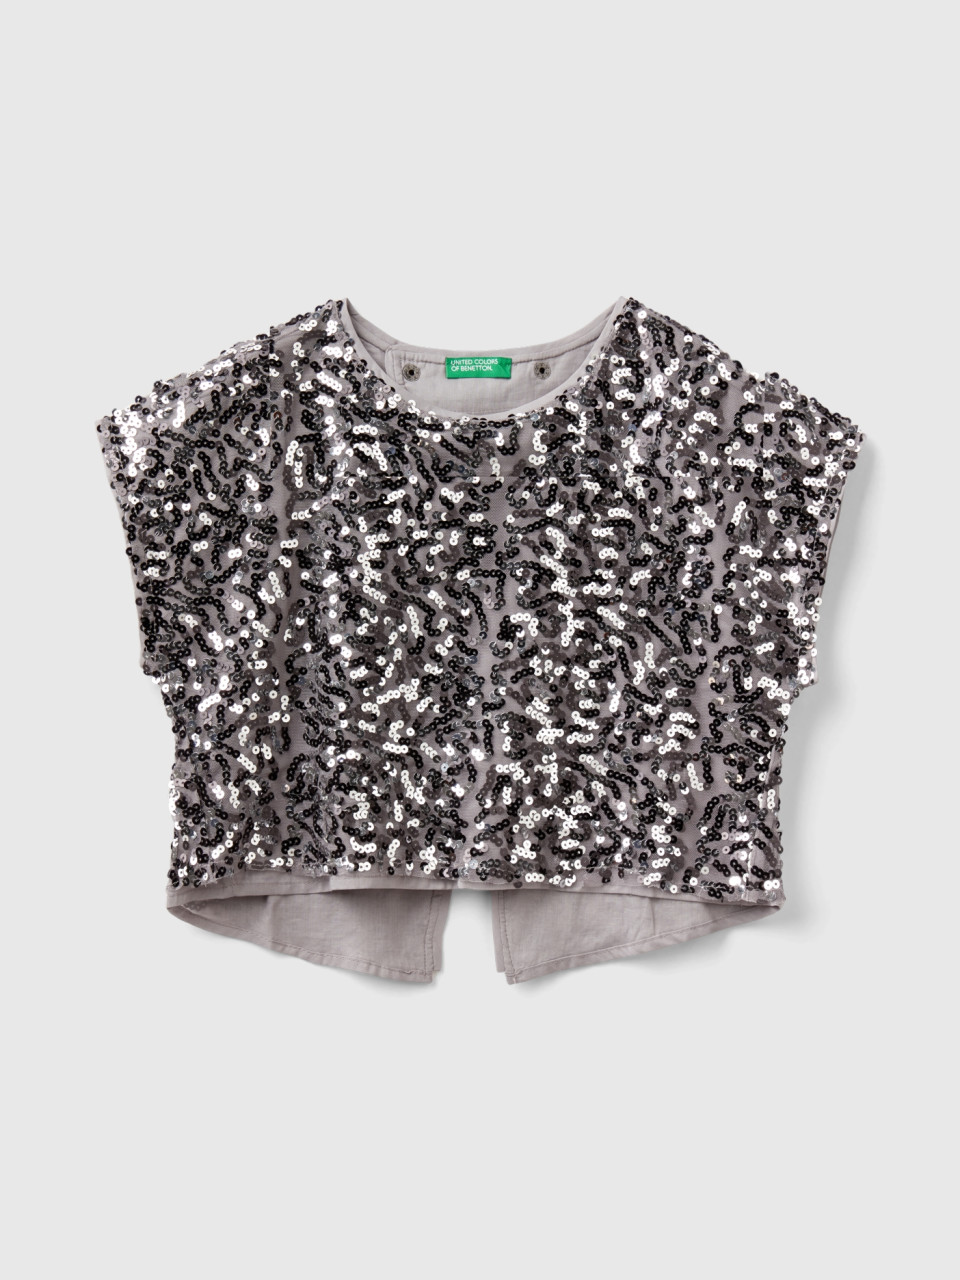 Benetton, Blouse With Sequins, Gray, Kids